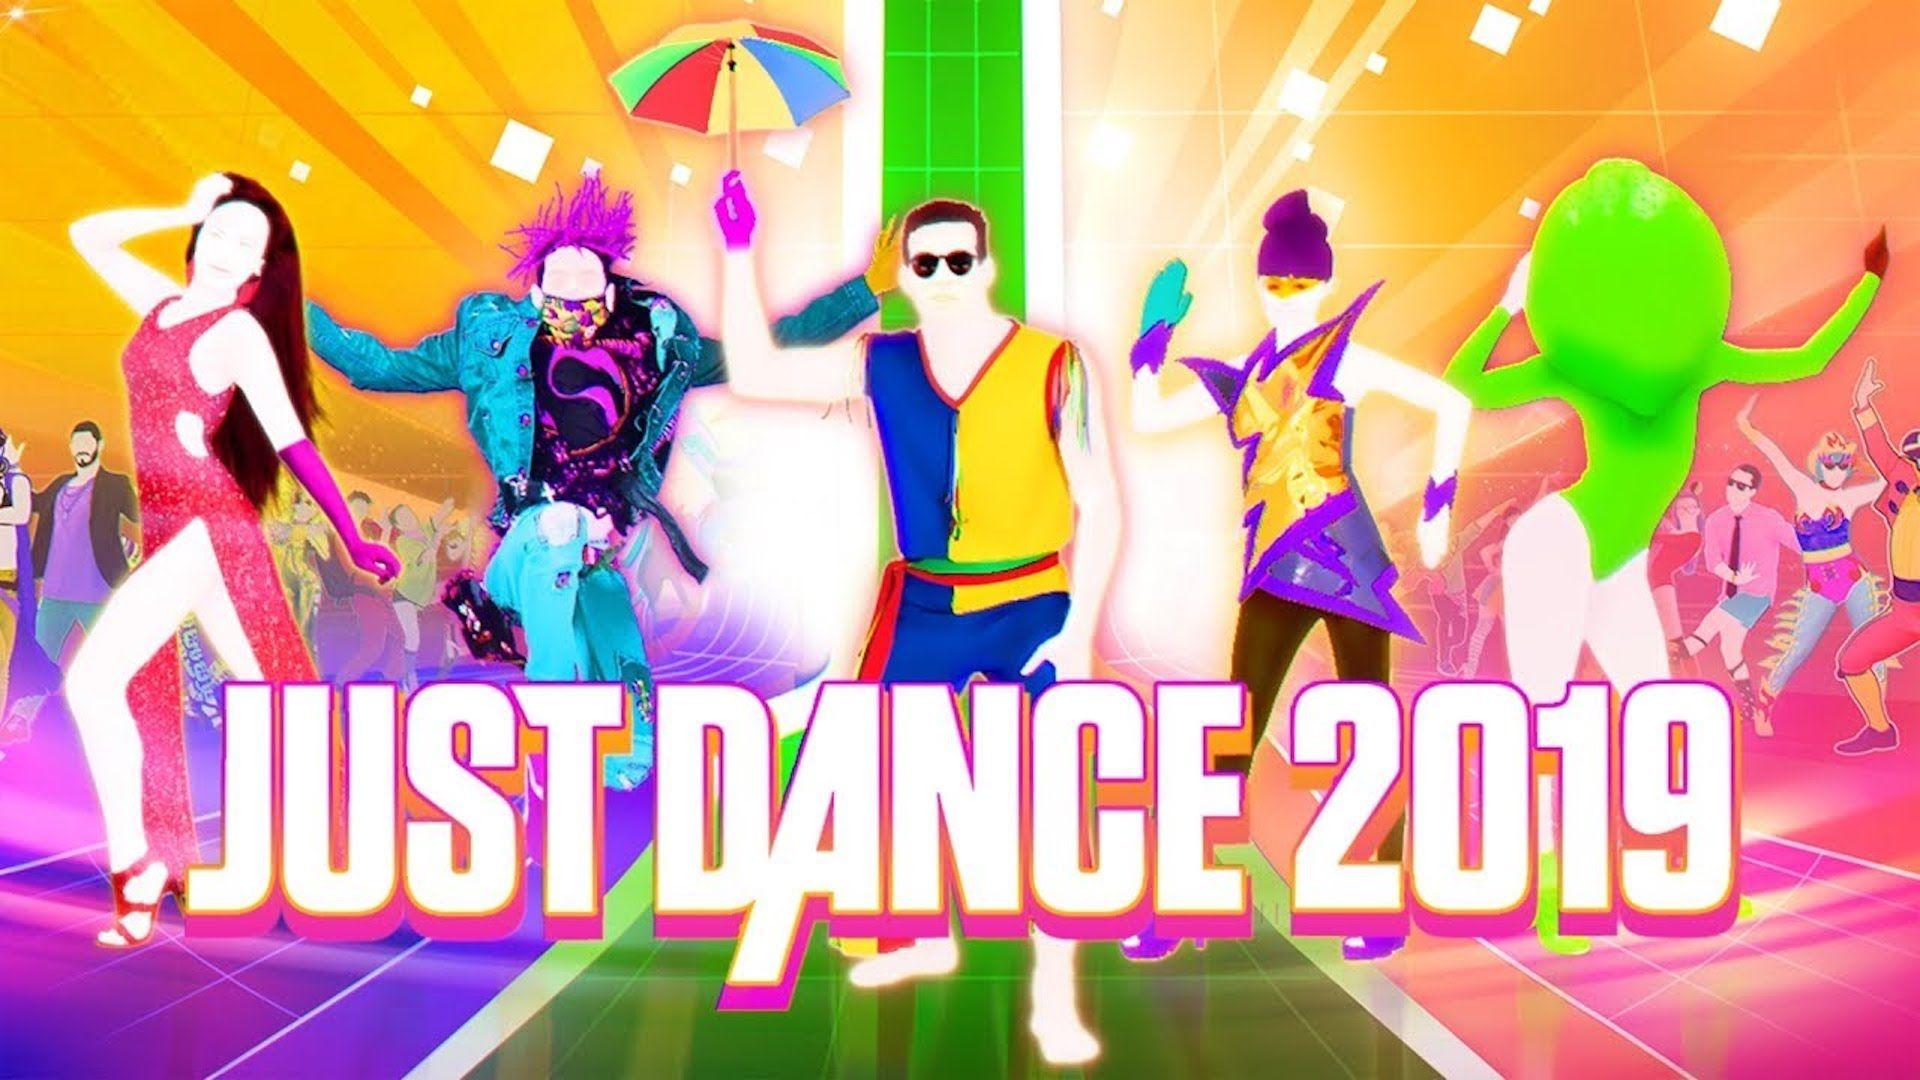 Just Dance 2019 announced for Nintendo Switch, Wii U, and Wii